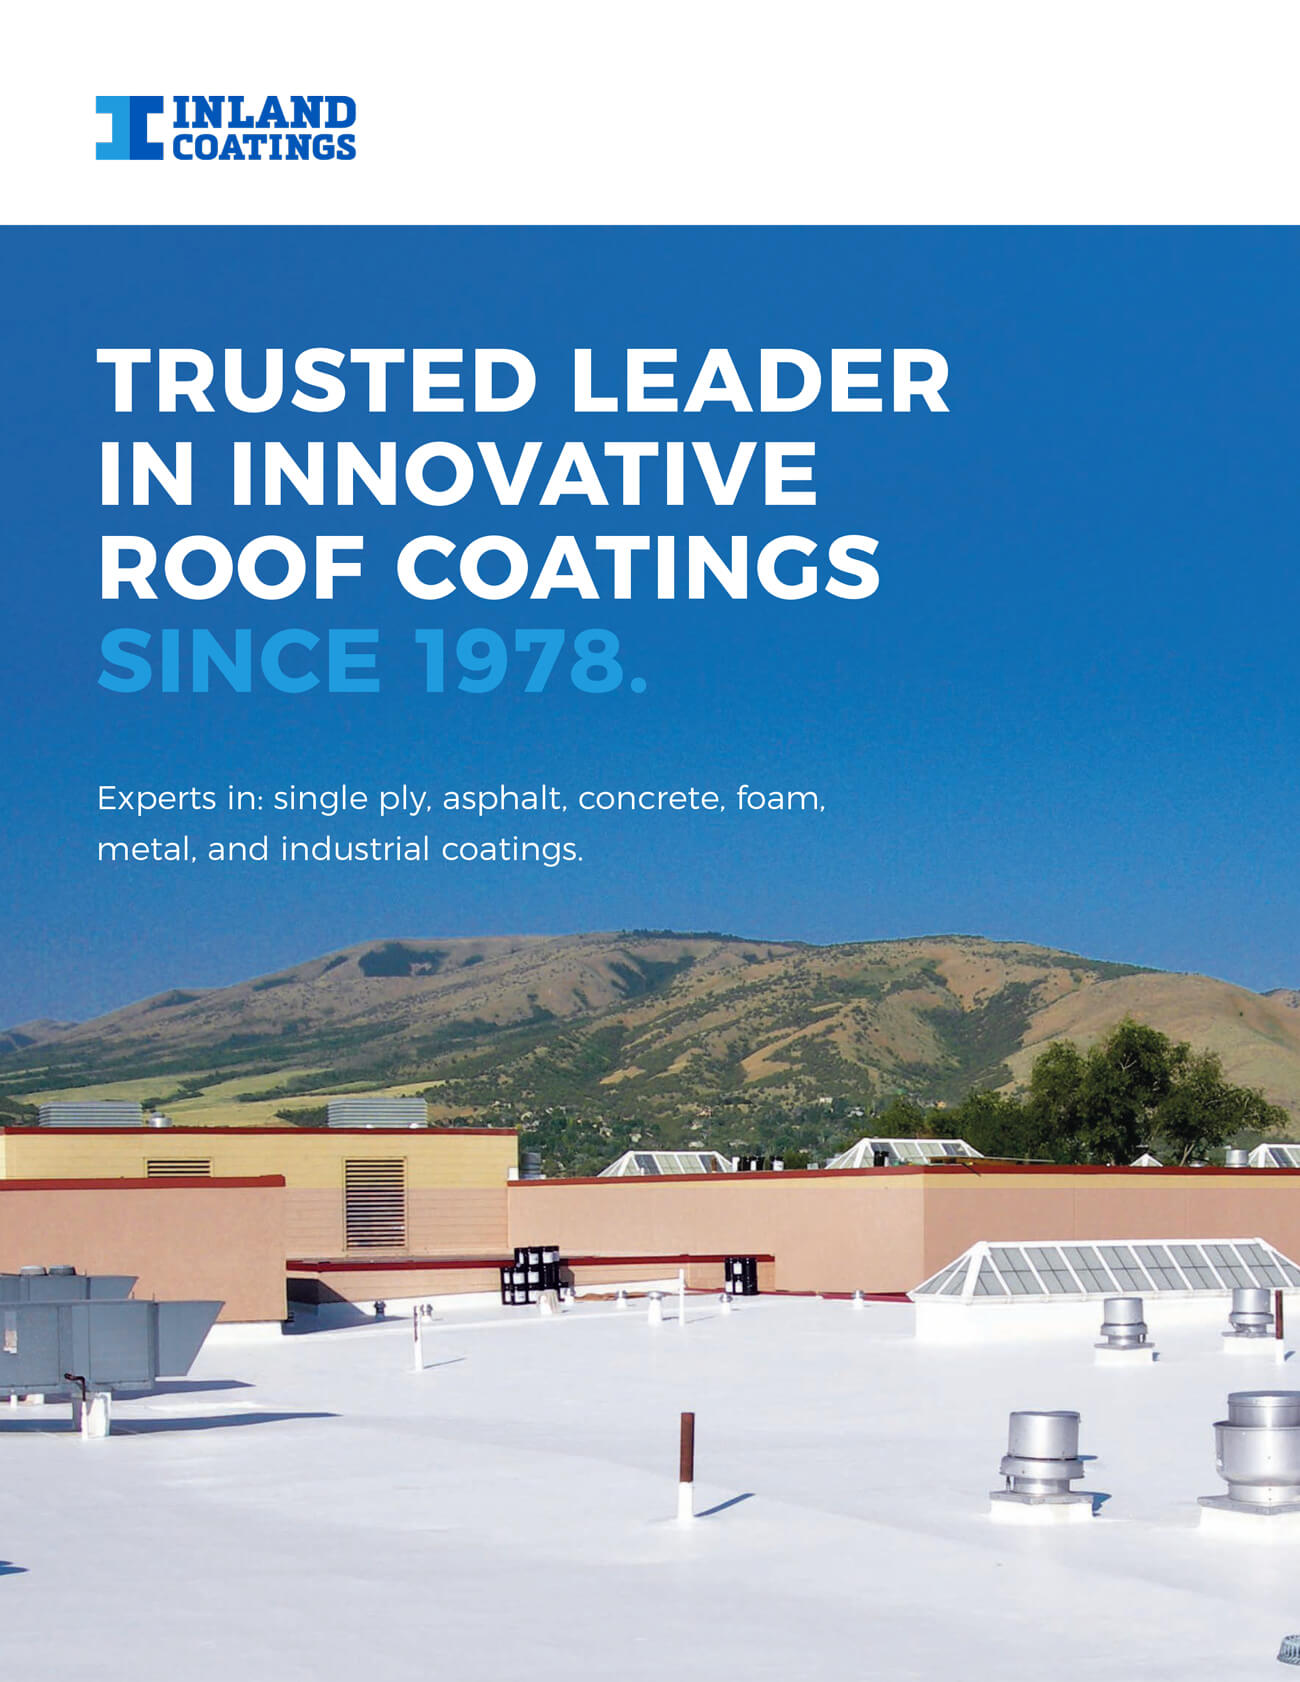 A photo preview of the Inland Coatings product brochure available upon request.